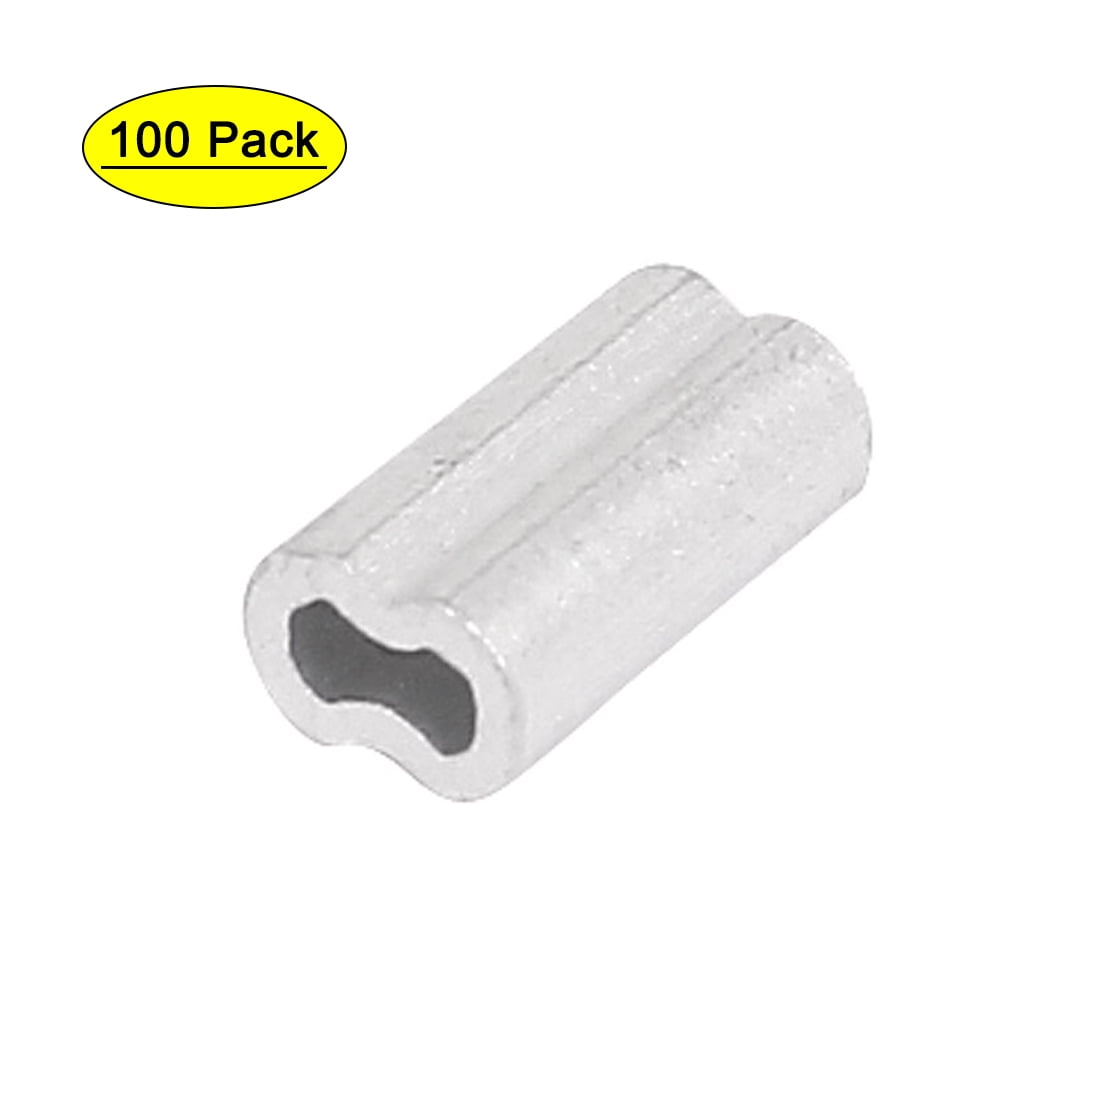 Rope 100 Aluminum Crimp Swage Sleeves for Wire Cable 3/8" 